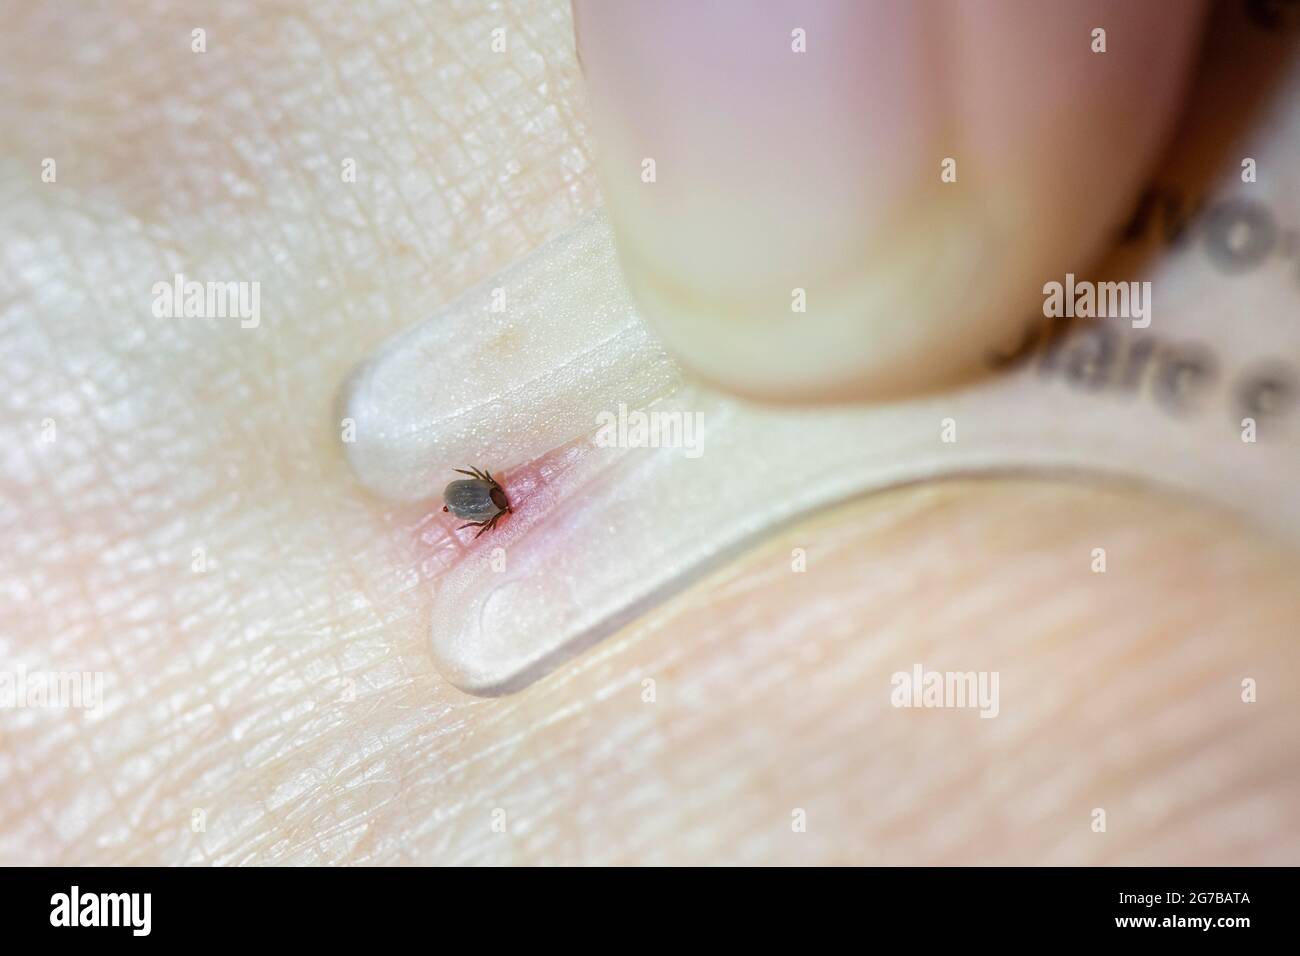 Castor Bean Tick (Ixodes ricinus), tick on human skin, tick bite, removal by tick card Stock Photo